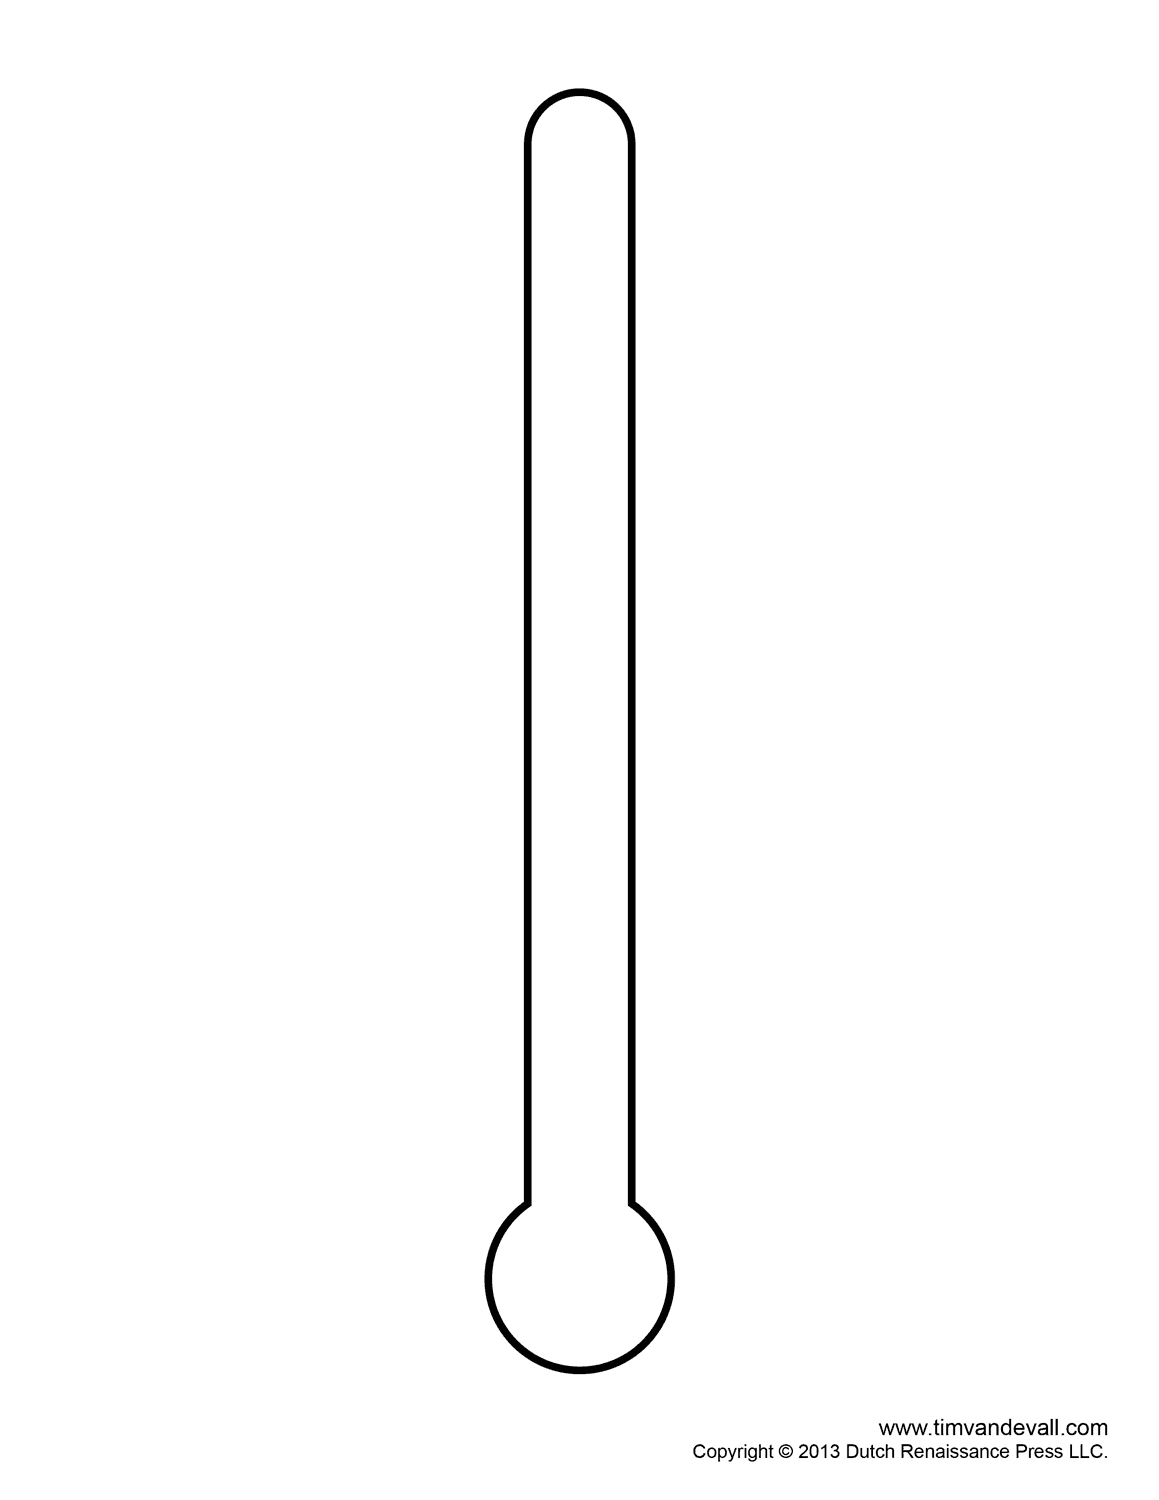 Thermometer 6 Thermometer Image Png Clipart